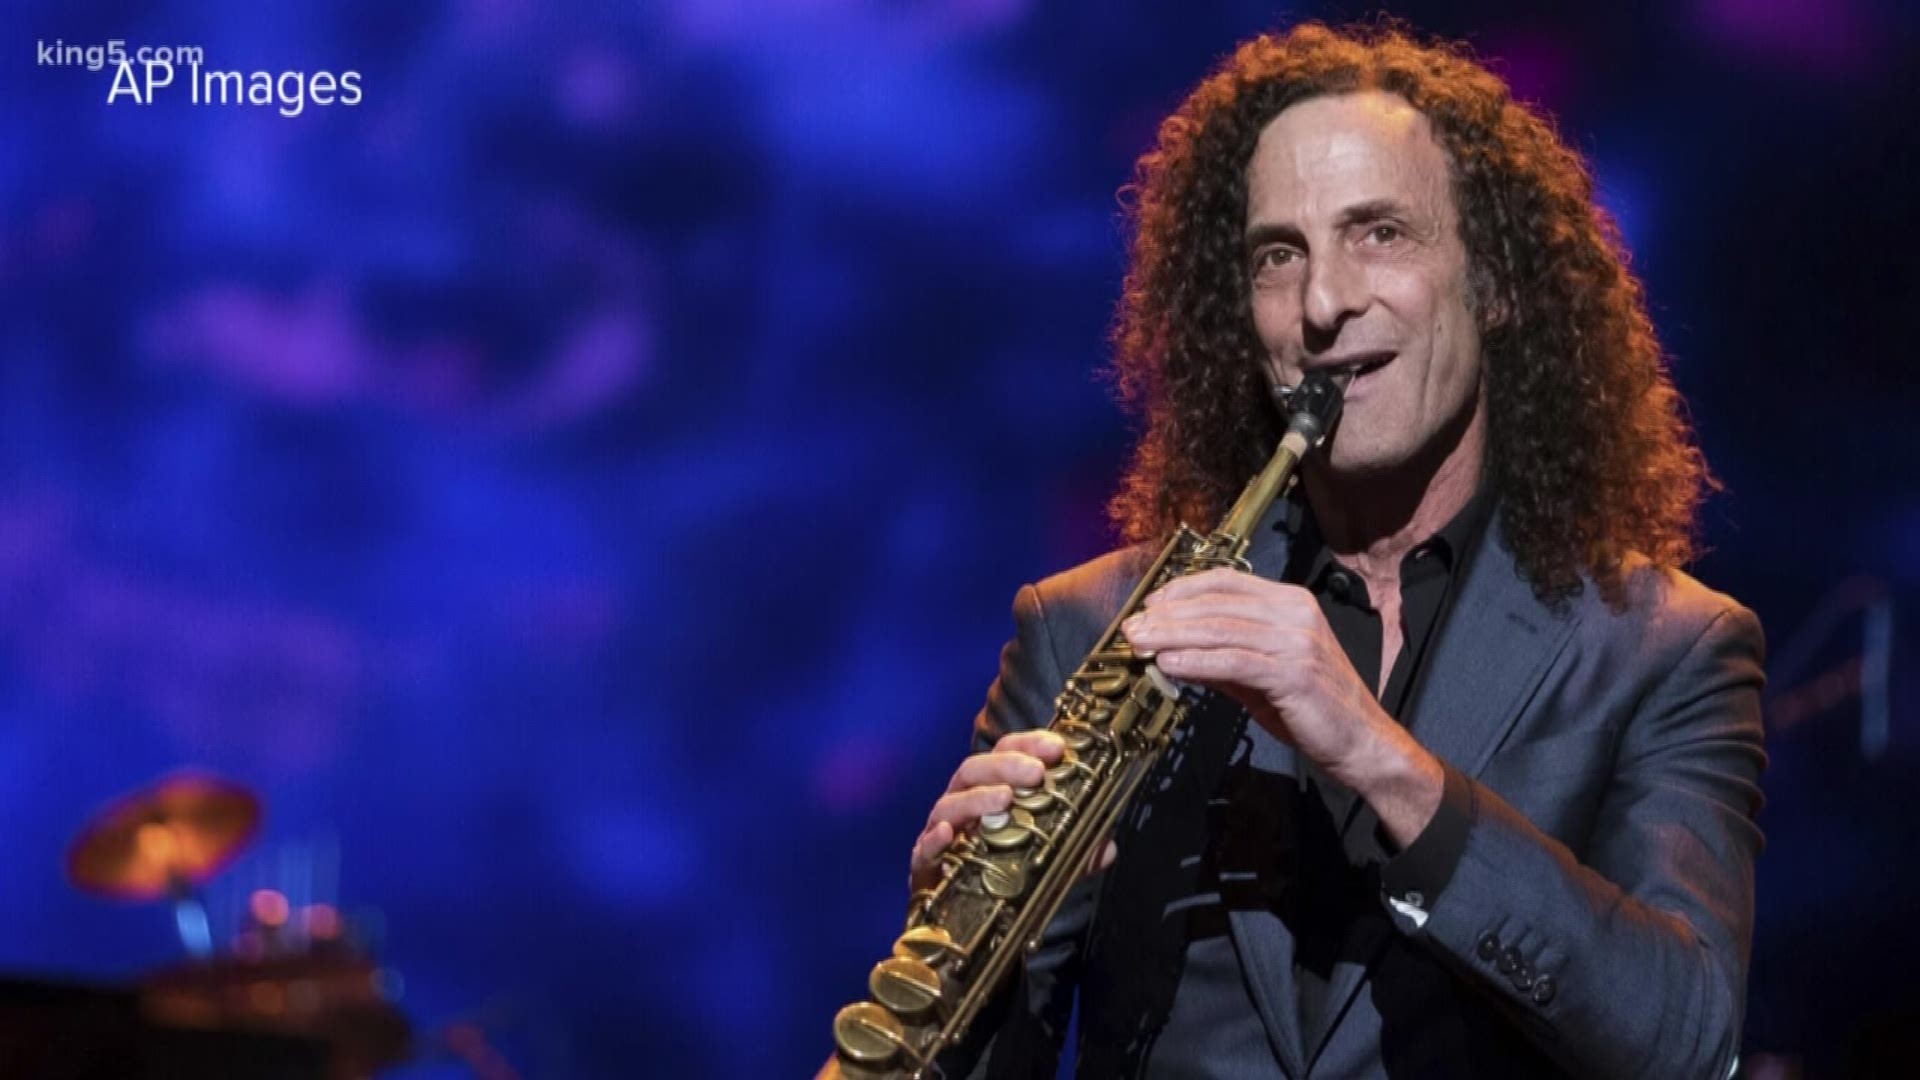 Police say Morris Gorelick, whose son is musician Kenny G, wrote three checks for $900,000 believing he was investing in an eyewear business.